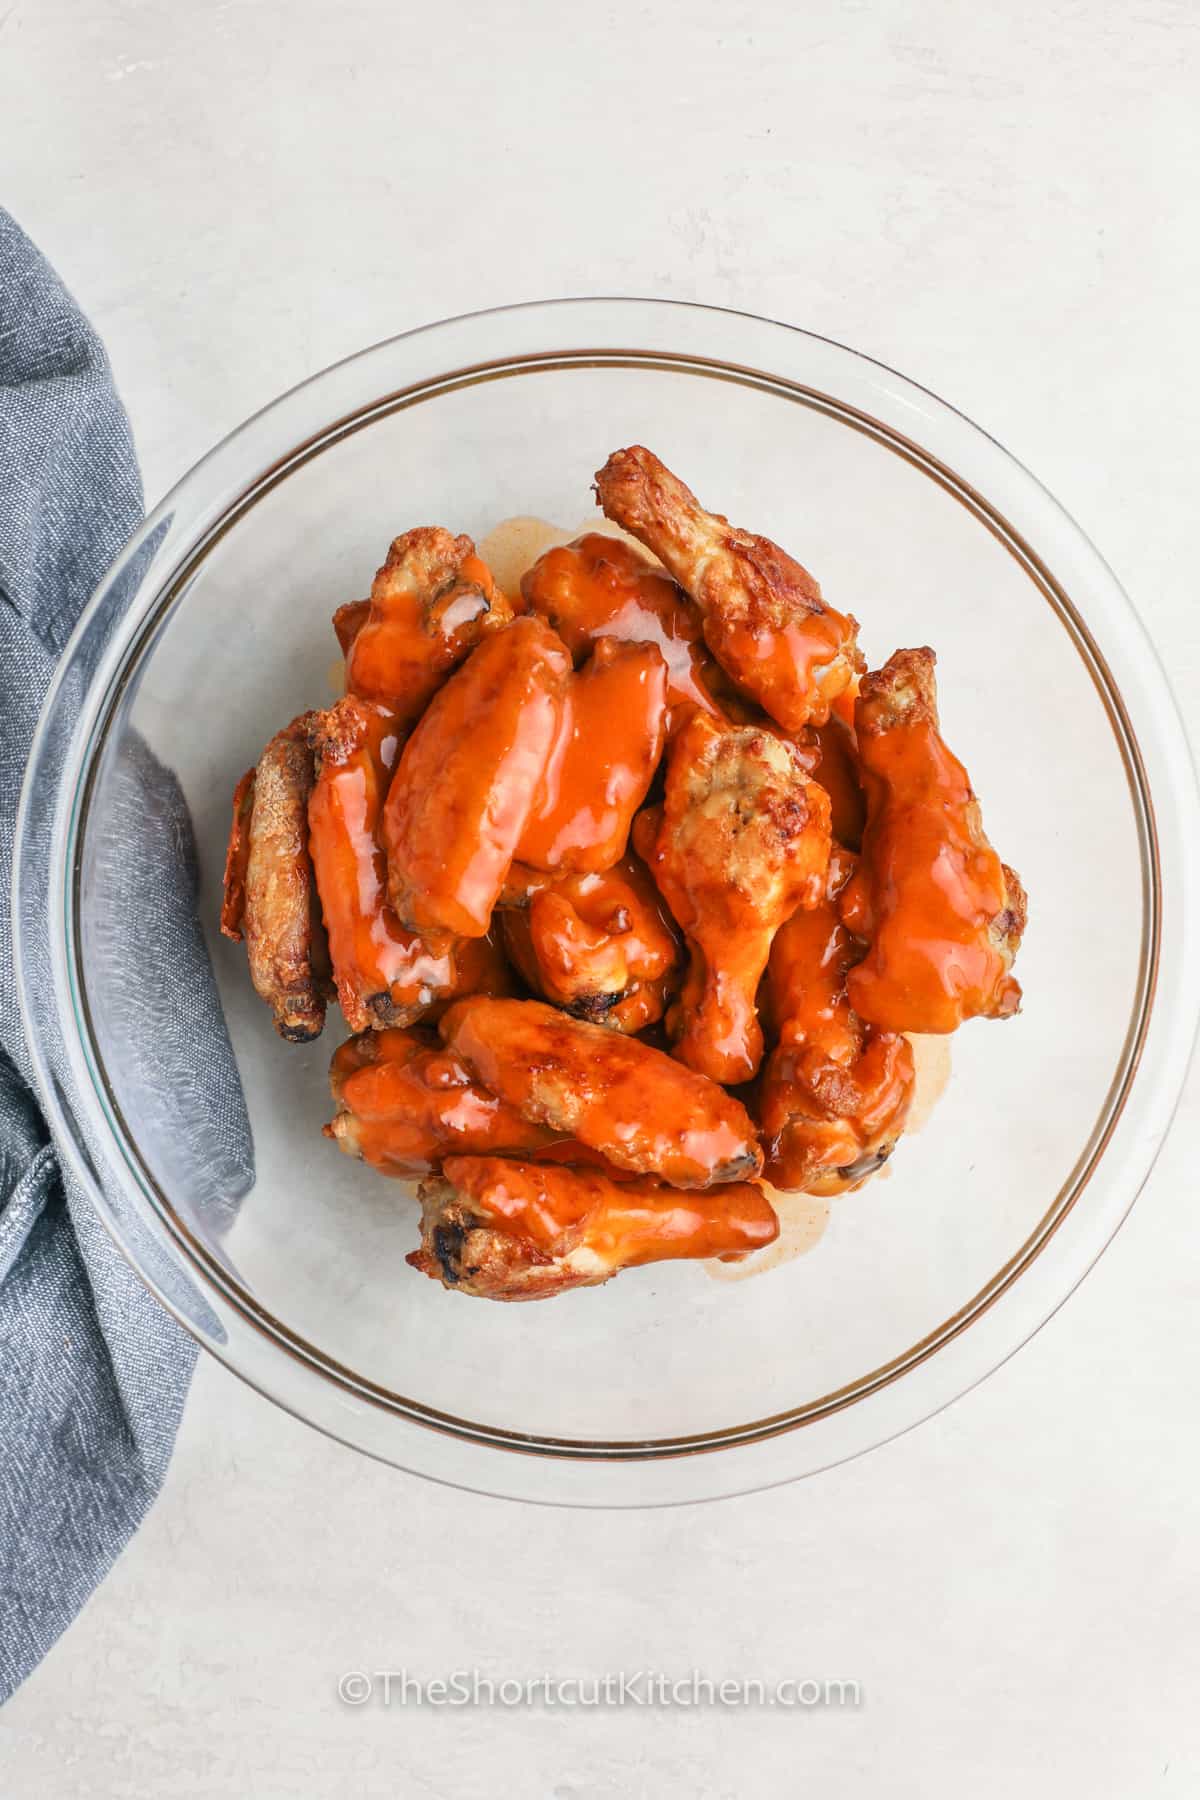 coating chicken in sauce to make Oven Baked Chicken Wings